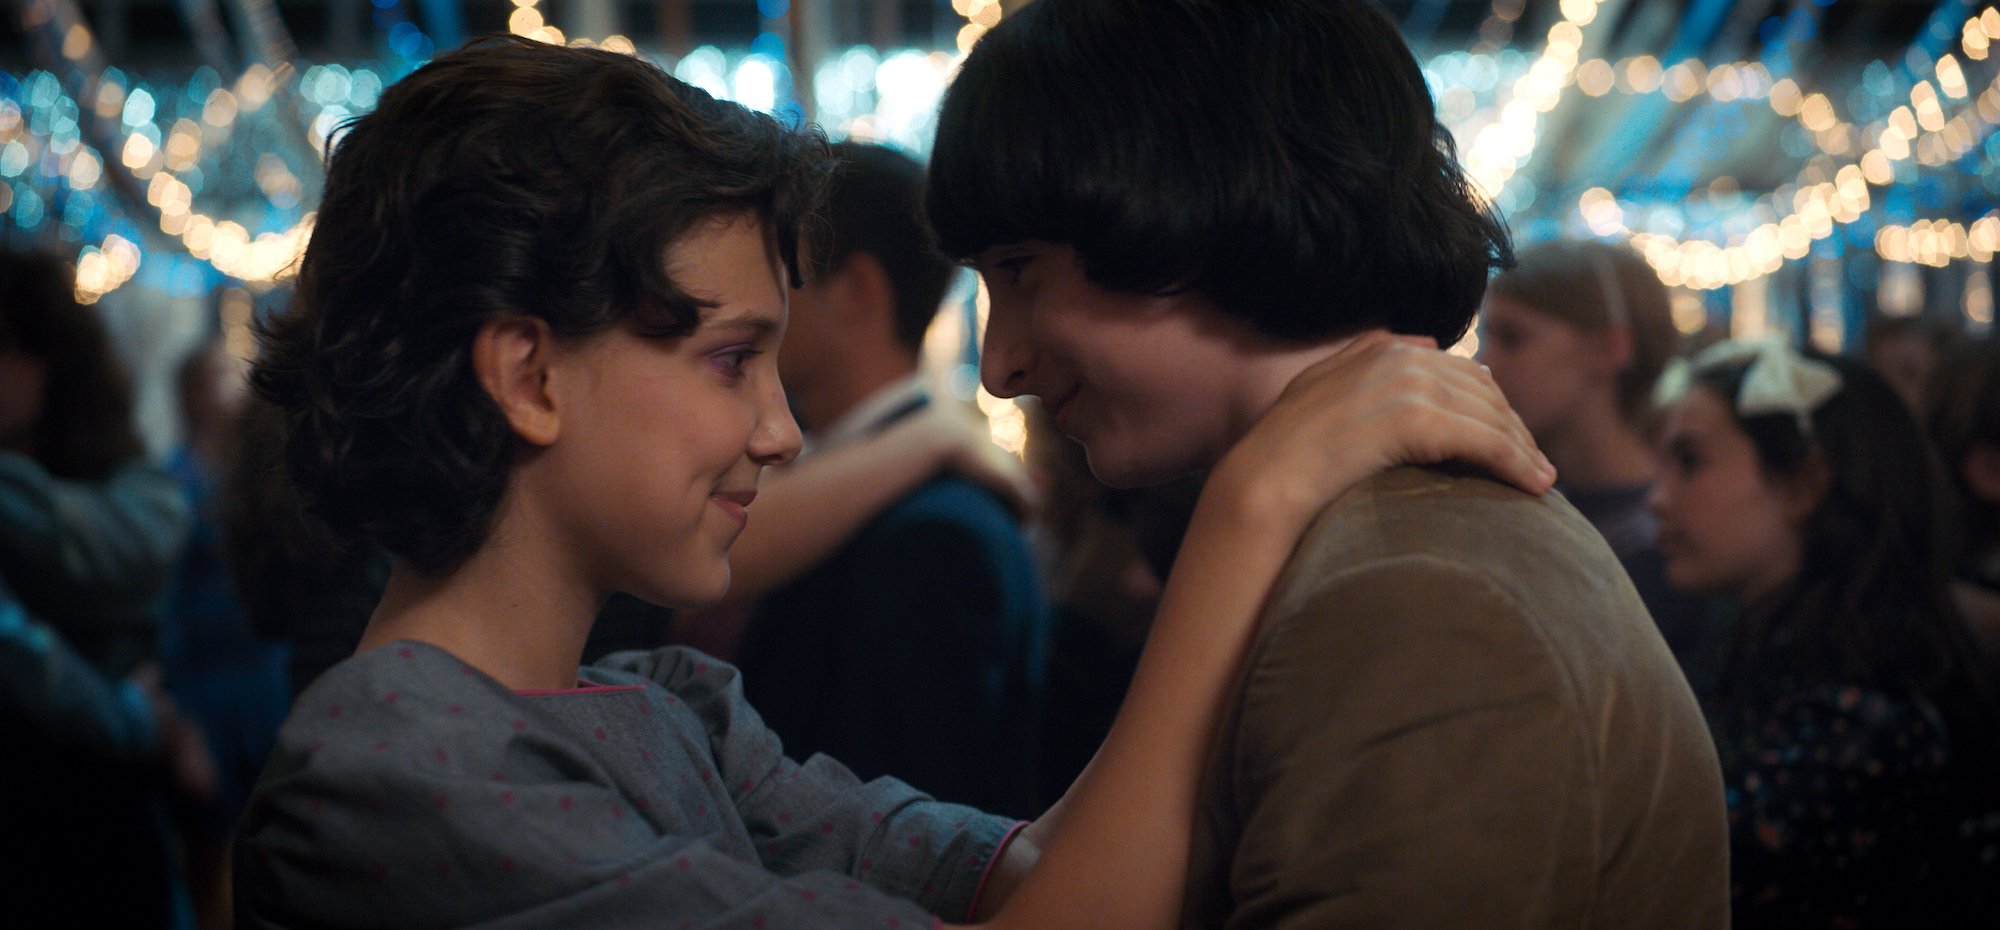 One of the 'Stranger Things' couples, Mike and Eleven, seen here at the school dance, are definitely endgame.